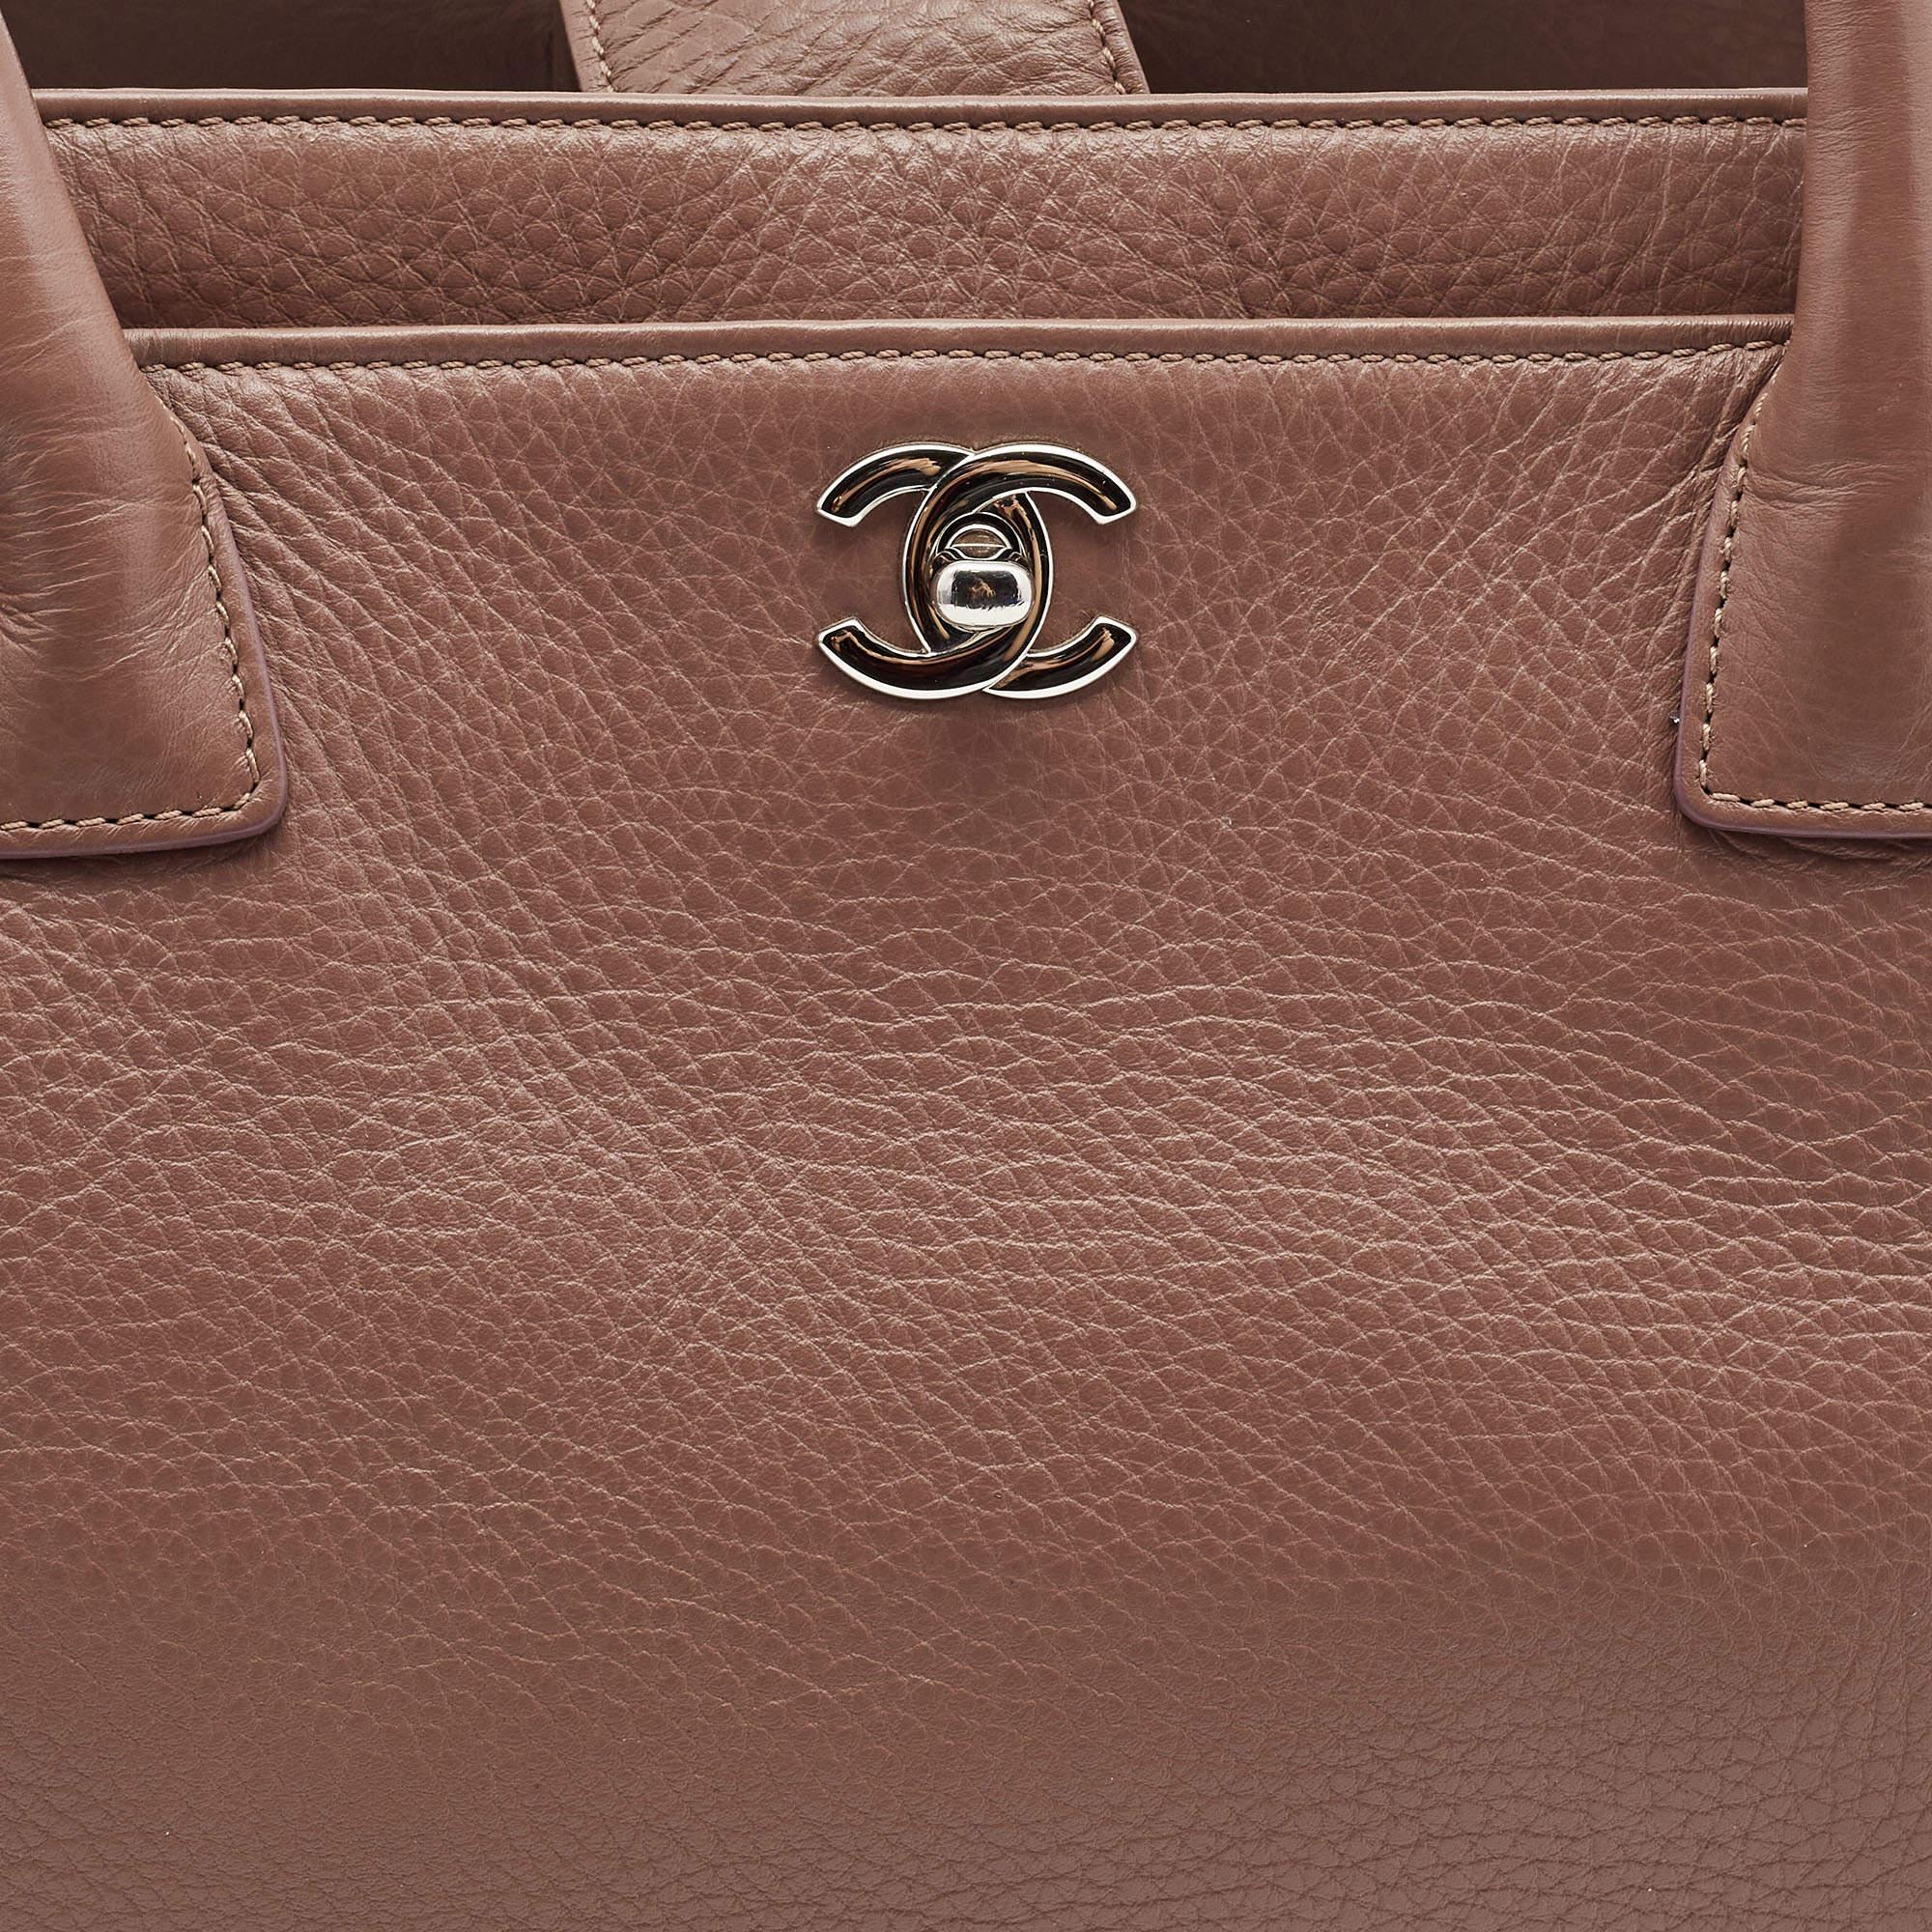 Chanel Old Rose Leather Cerf Shopper Tote 5